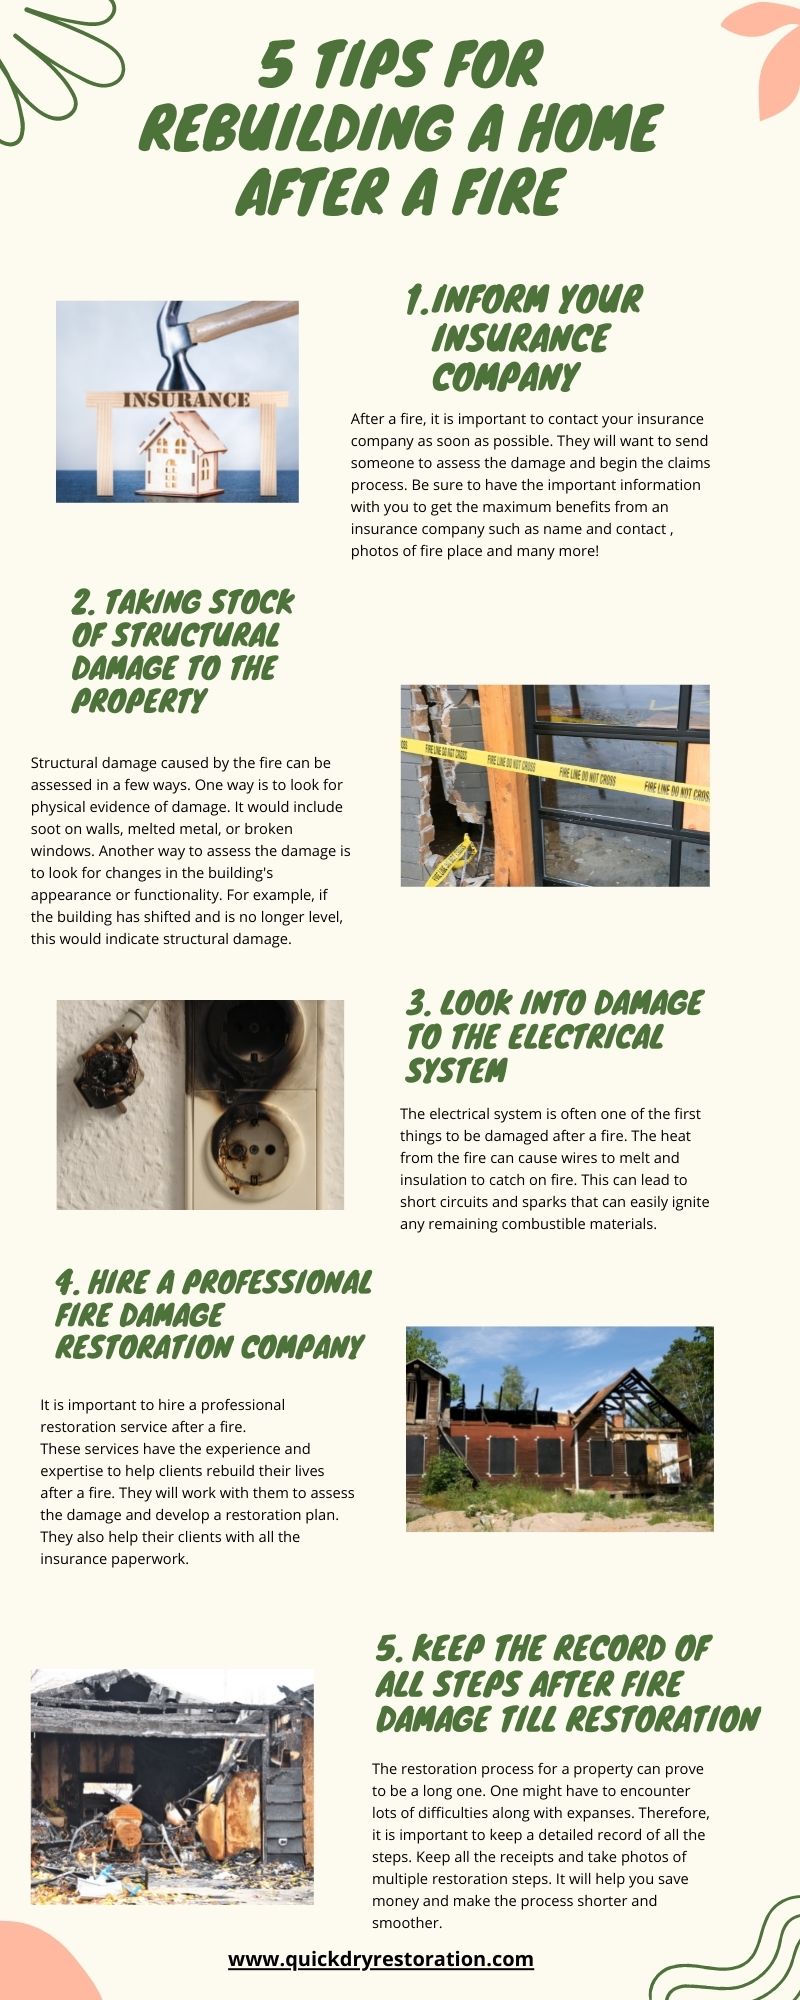 5 Tips for Rebuilding a Home After a Fire